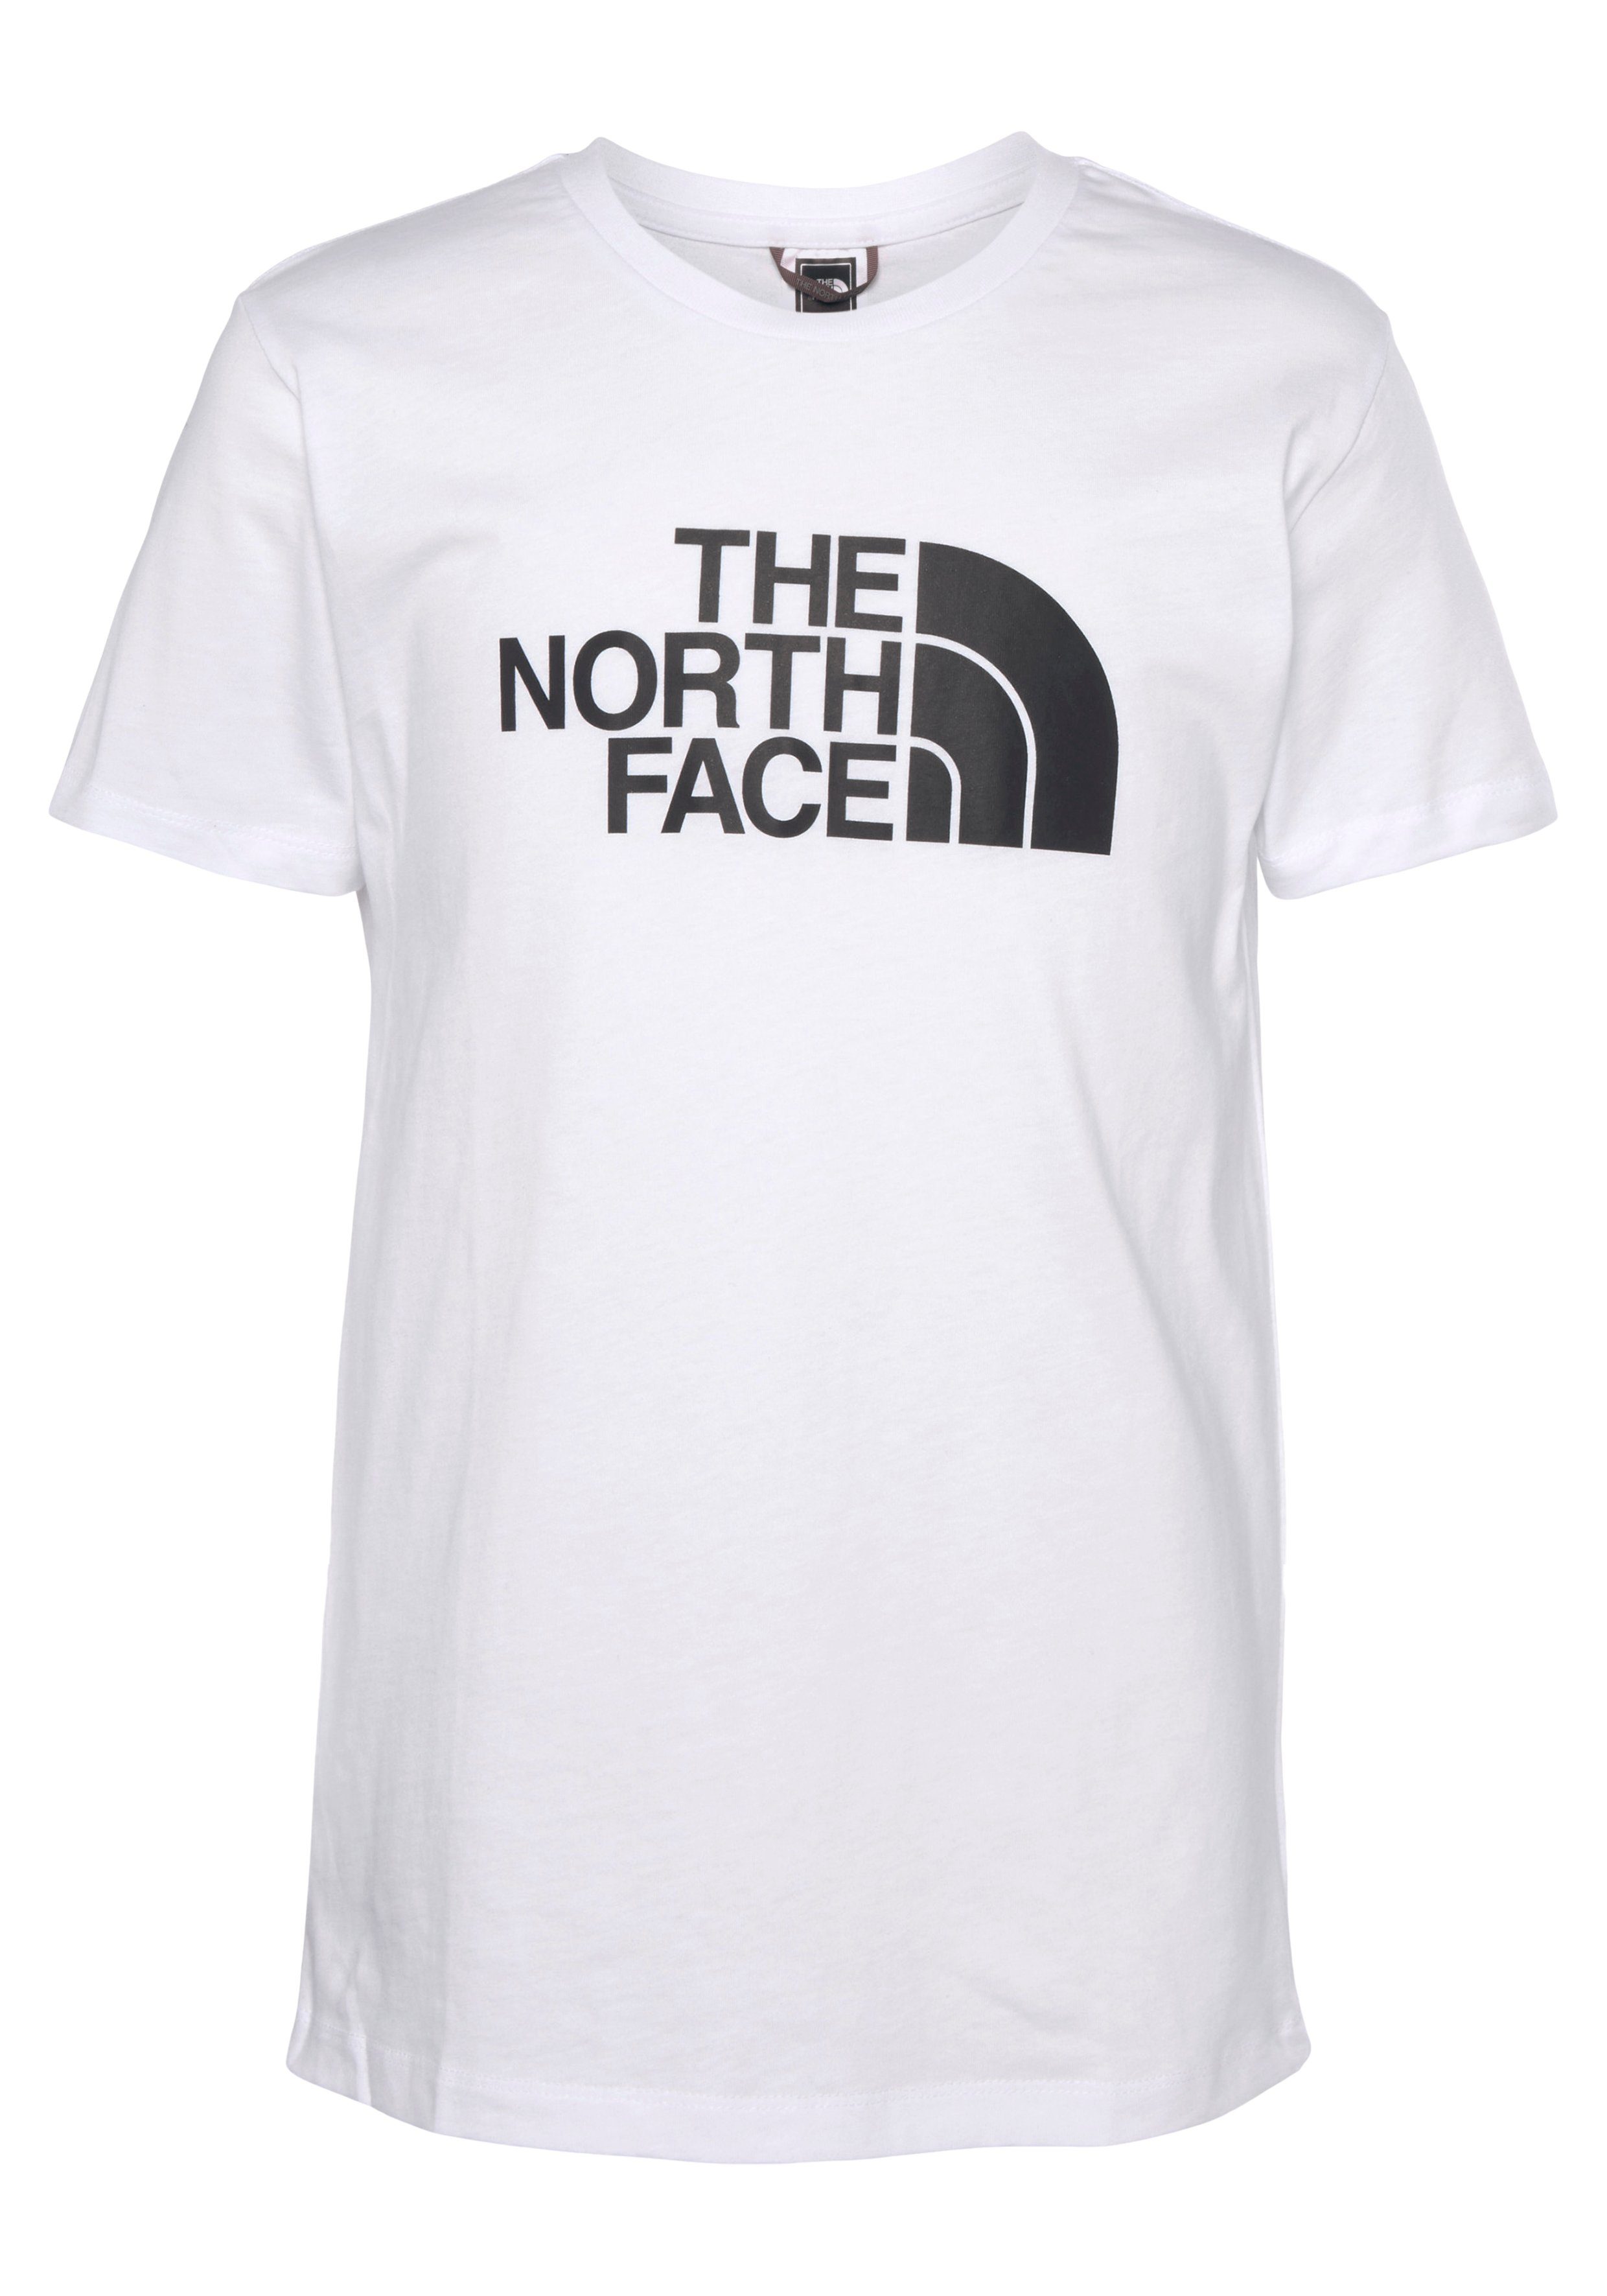 EASY North white - TEE The Kinder Face T-Shirt für